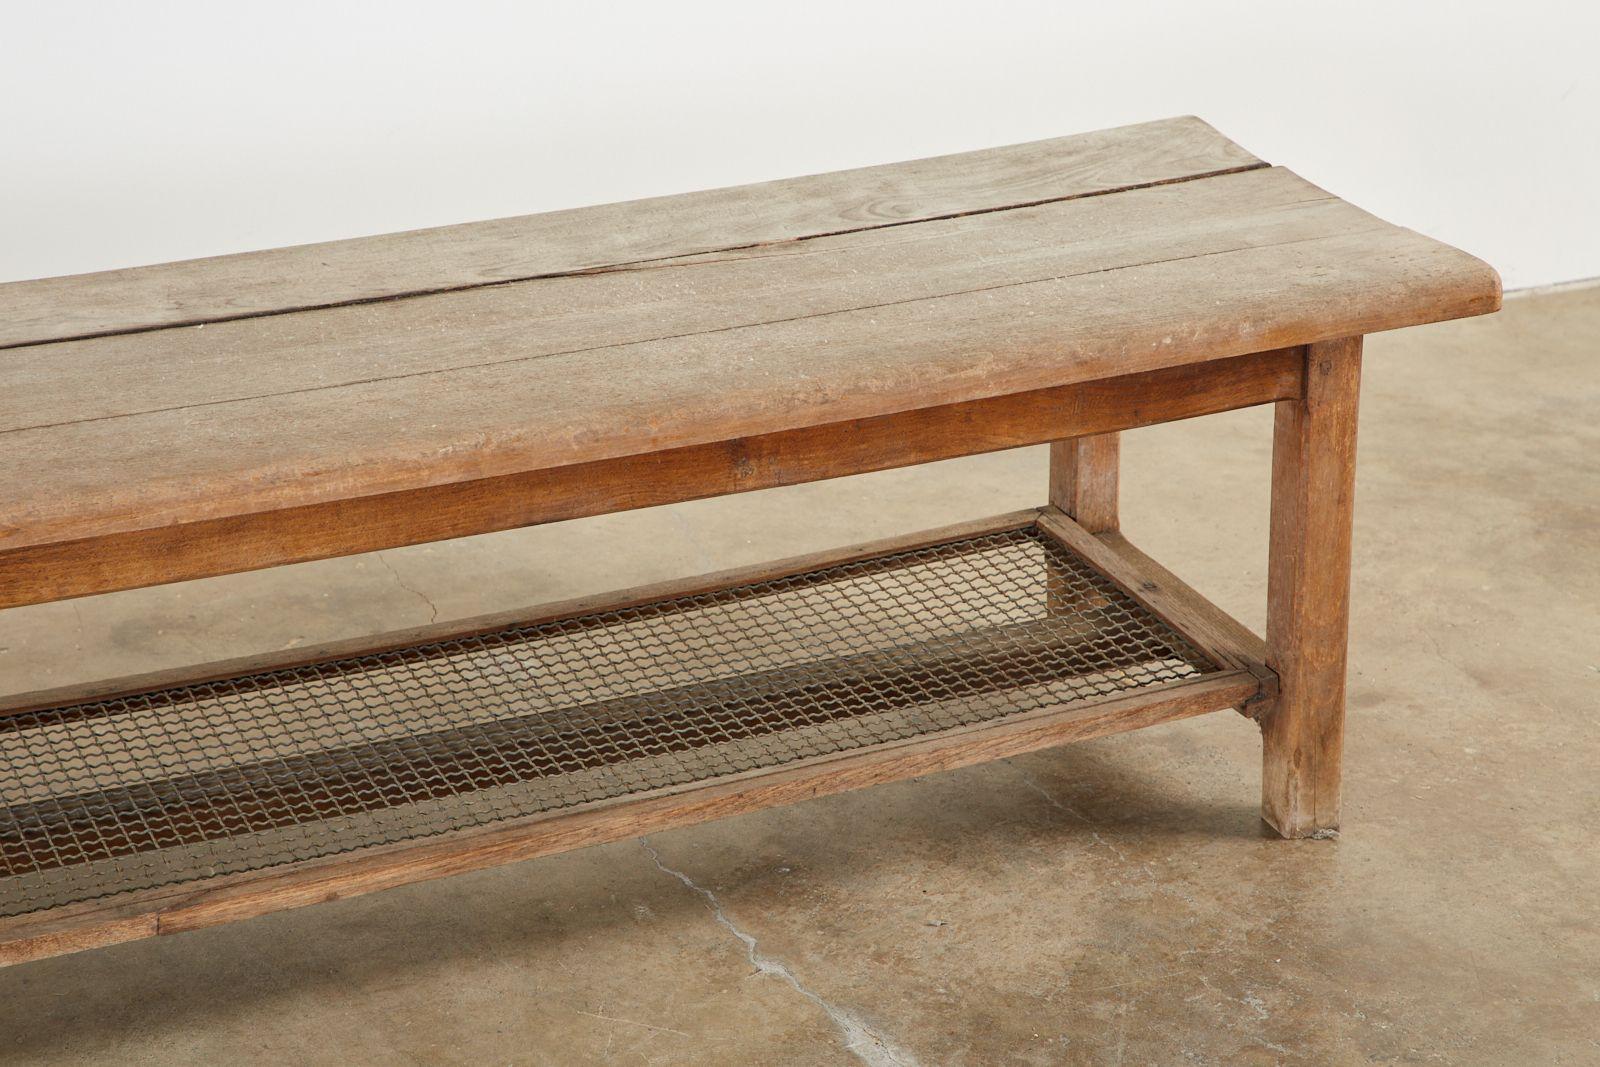 20th Century Pair of Weathered Pine Benches with Storage Shelves